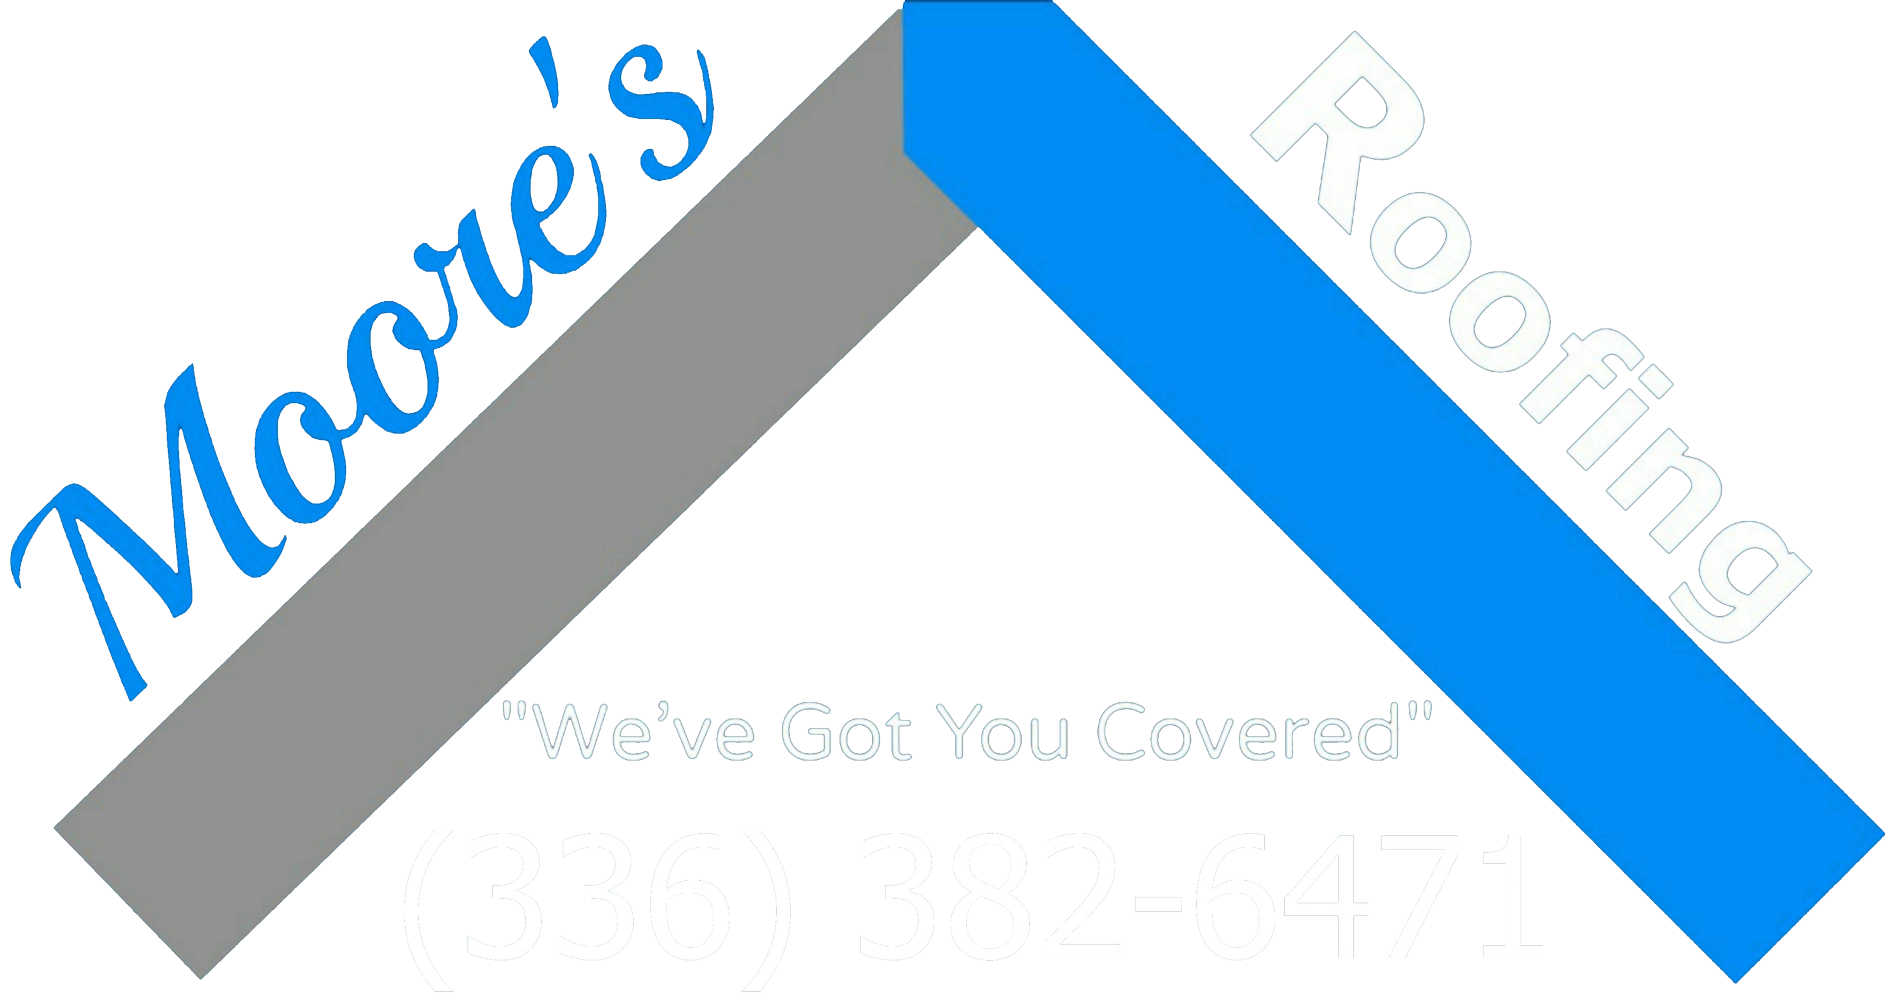 Moore's Roofing Logo